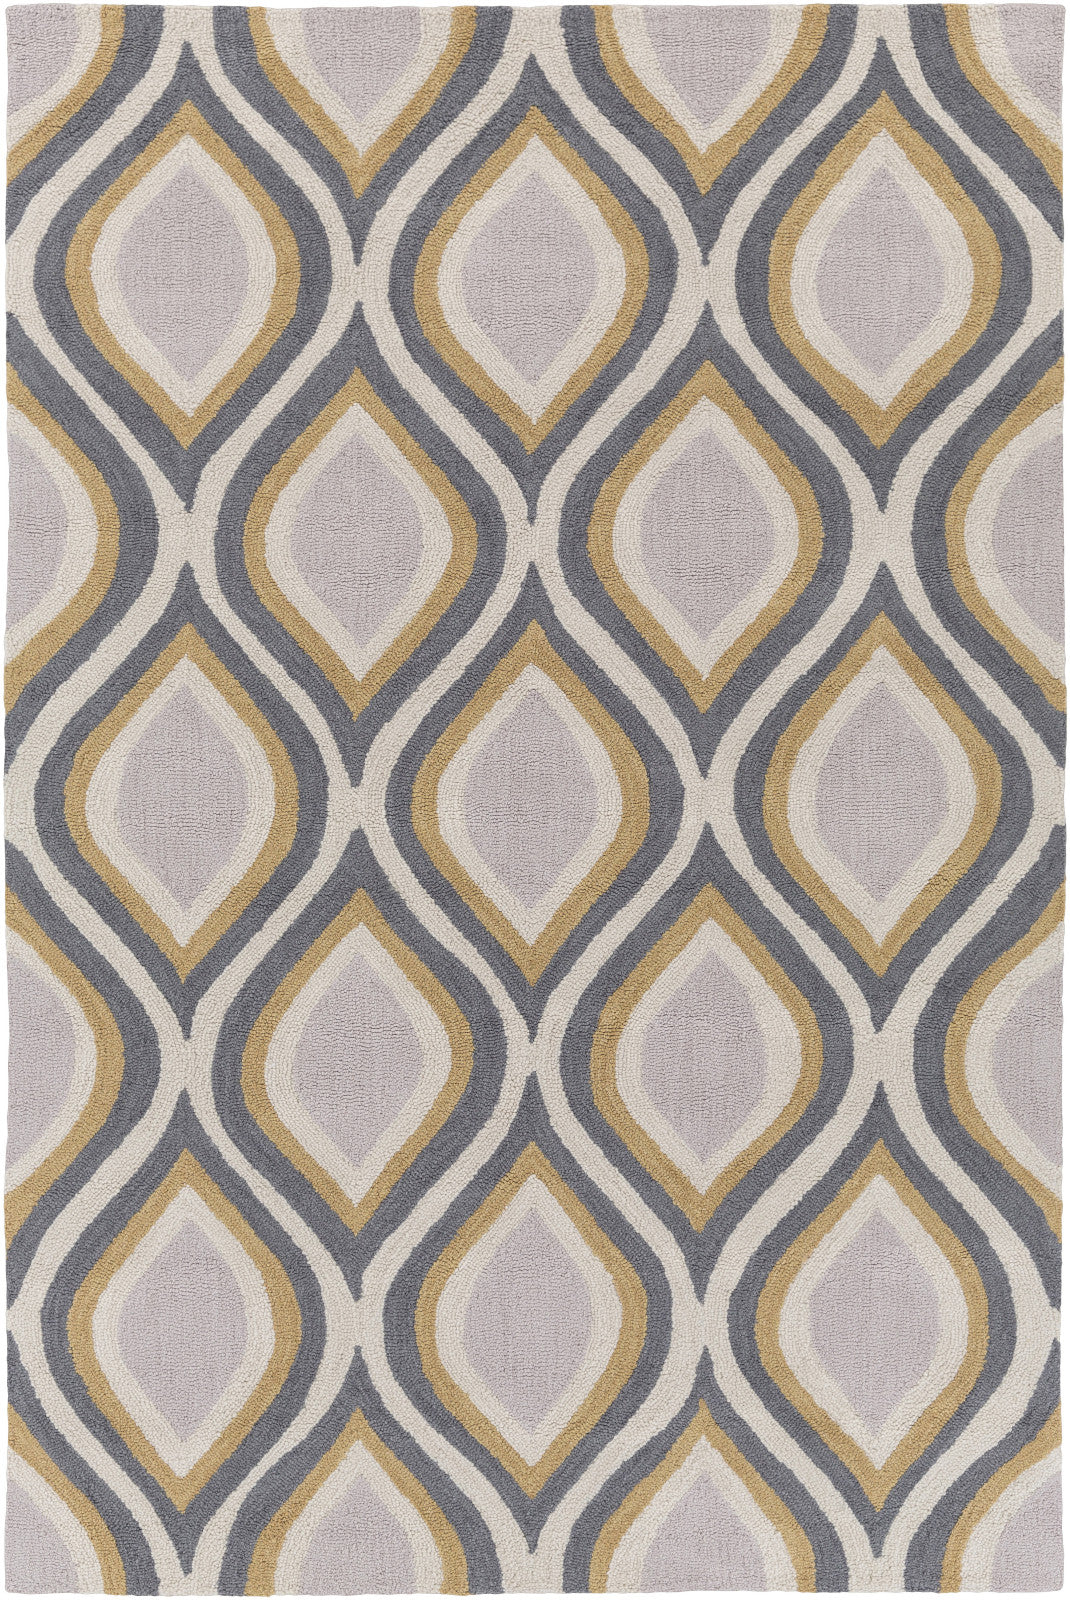 Artistic Weavers Holden Lucy Straw/Gray Area Rug main image